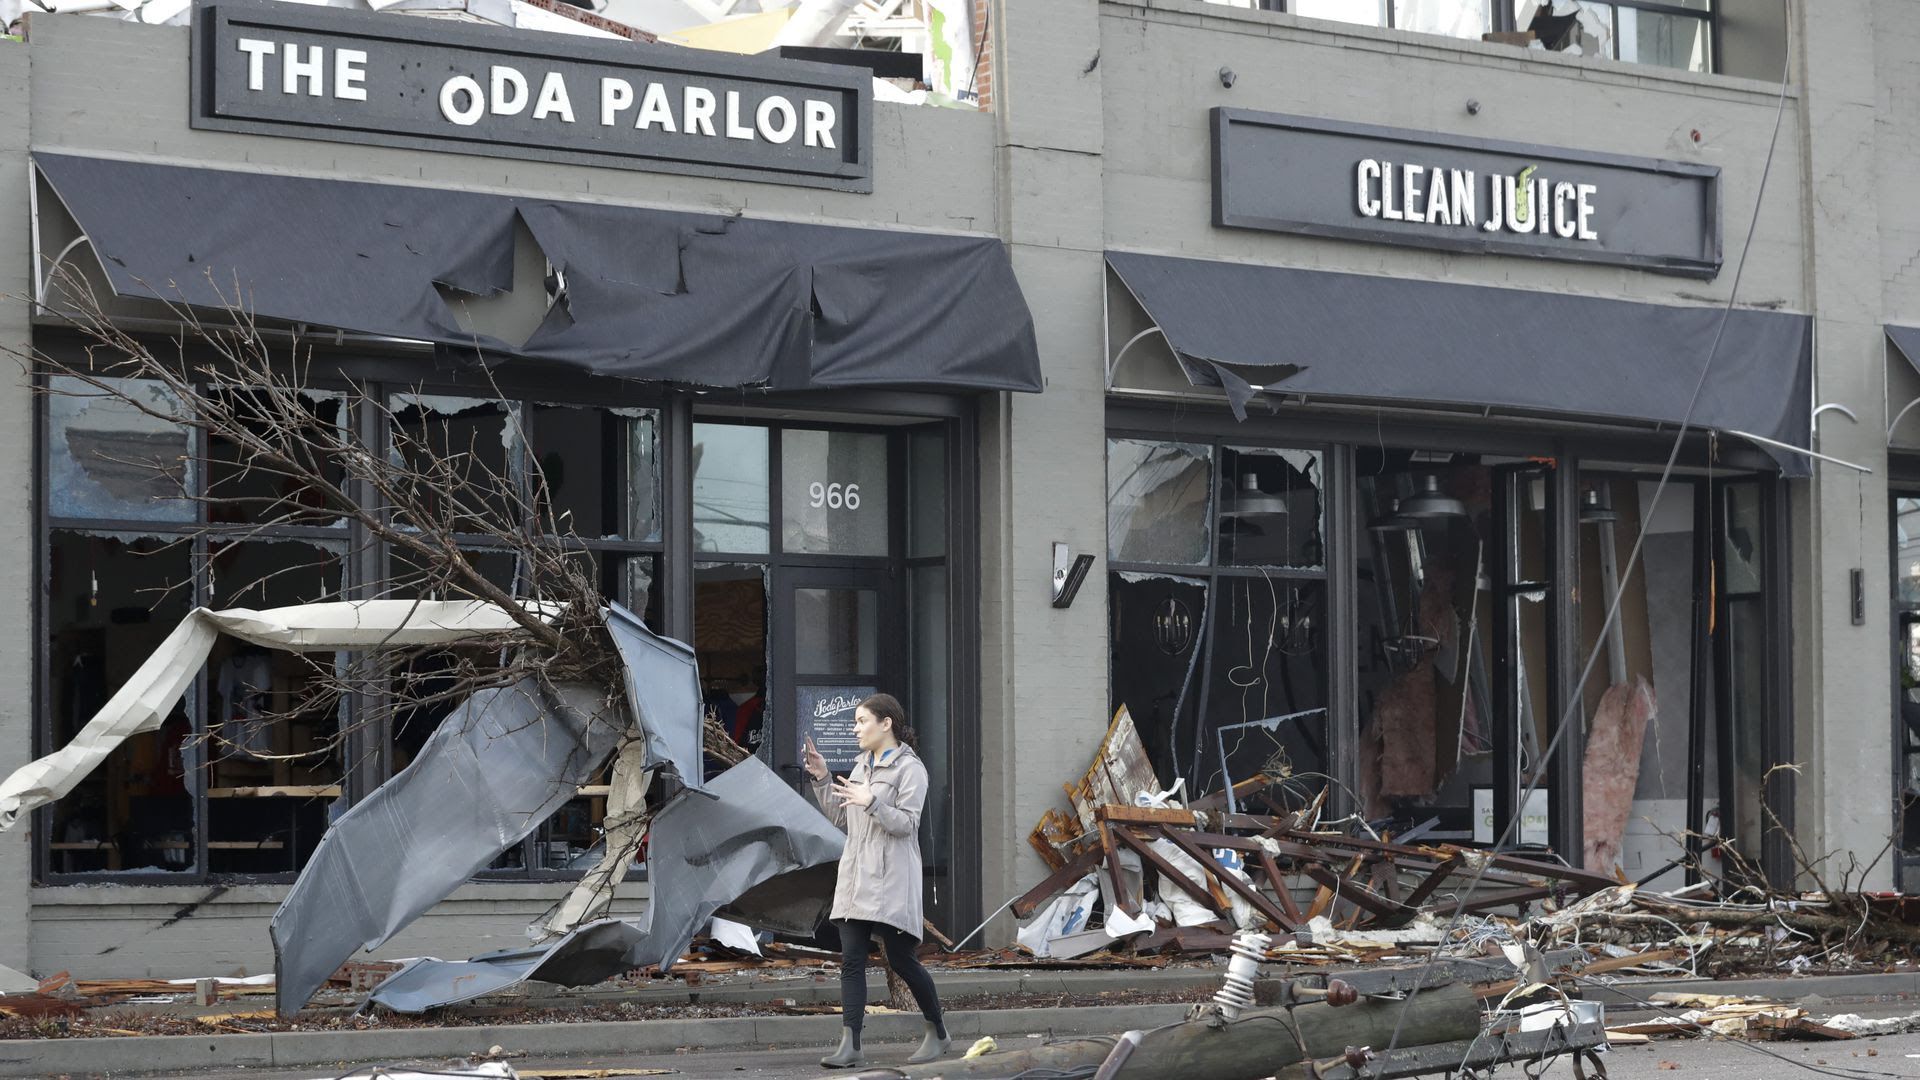 A scene of damage following the March, 2020 tornado in Nashville. Signs and trash are askew. 